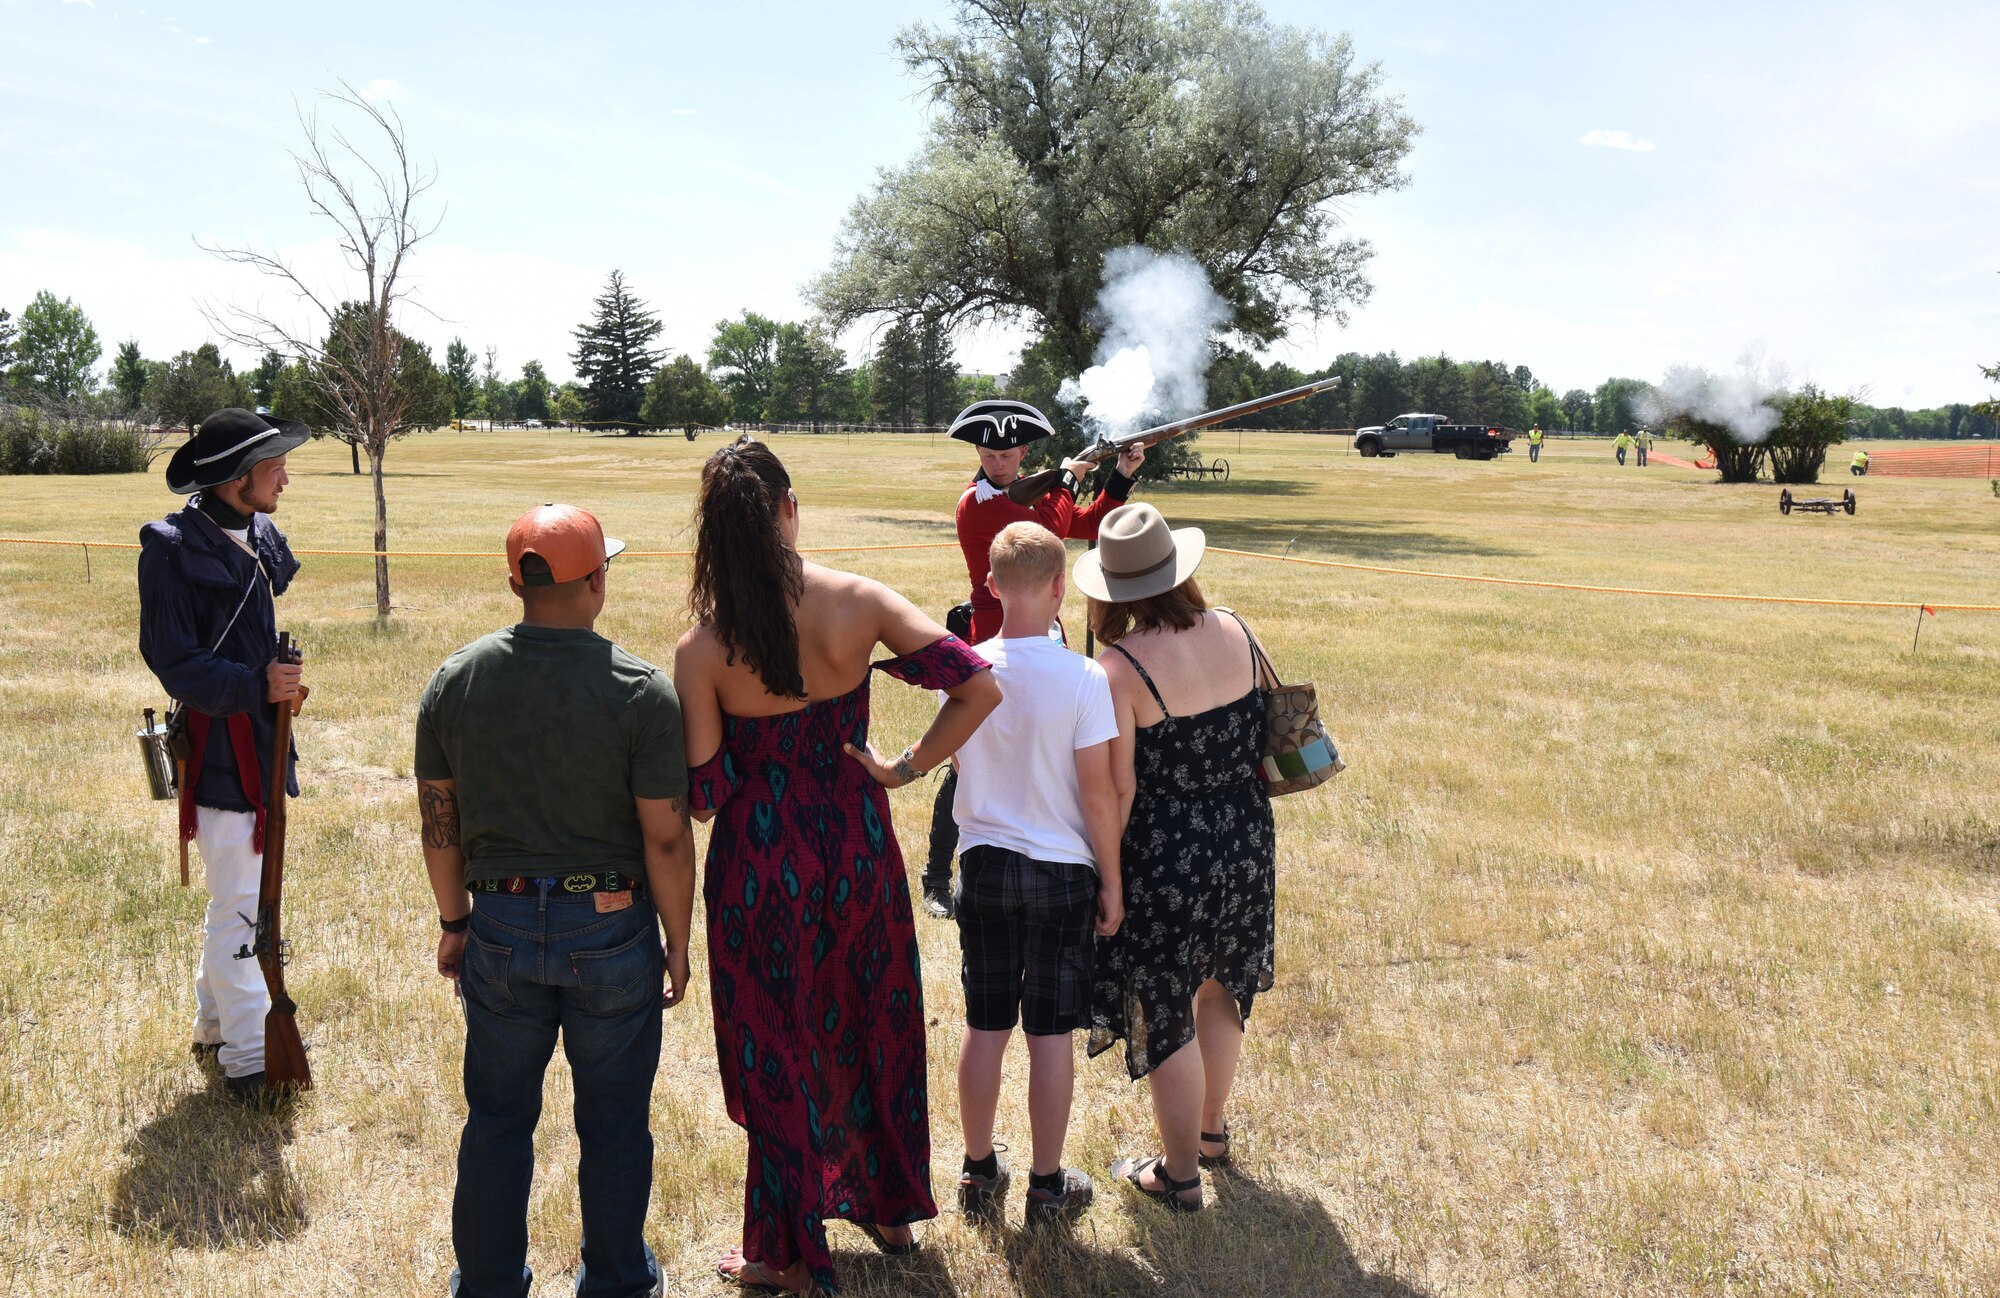 F.E. Warren Air Force Base opened its gates to host the annual Fort D.A. Russell Days July 20-22. This open house brought the military and civilian communities together to celebrate and learn about the base’s rich history.